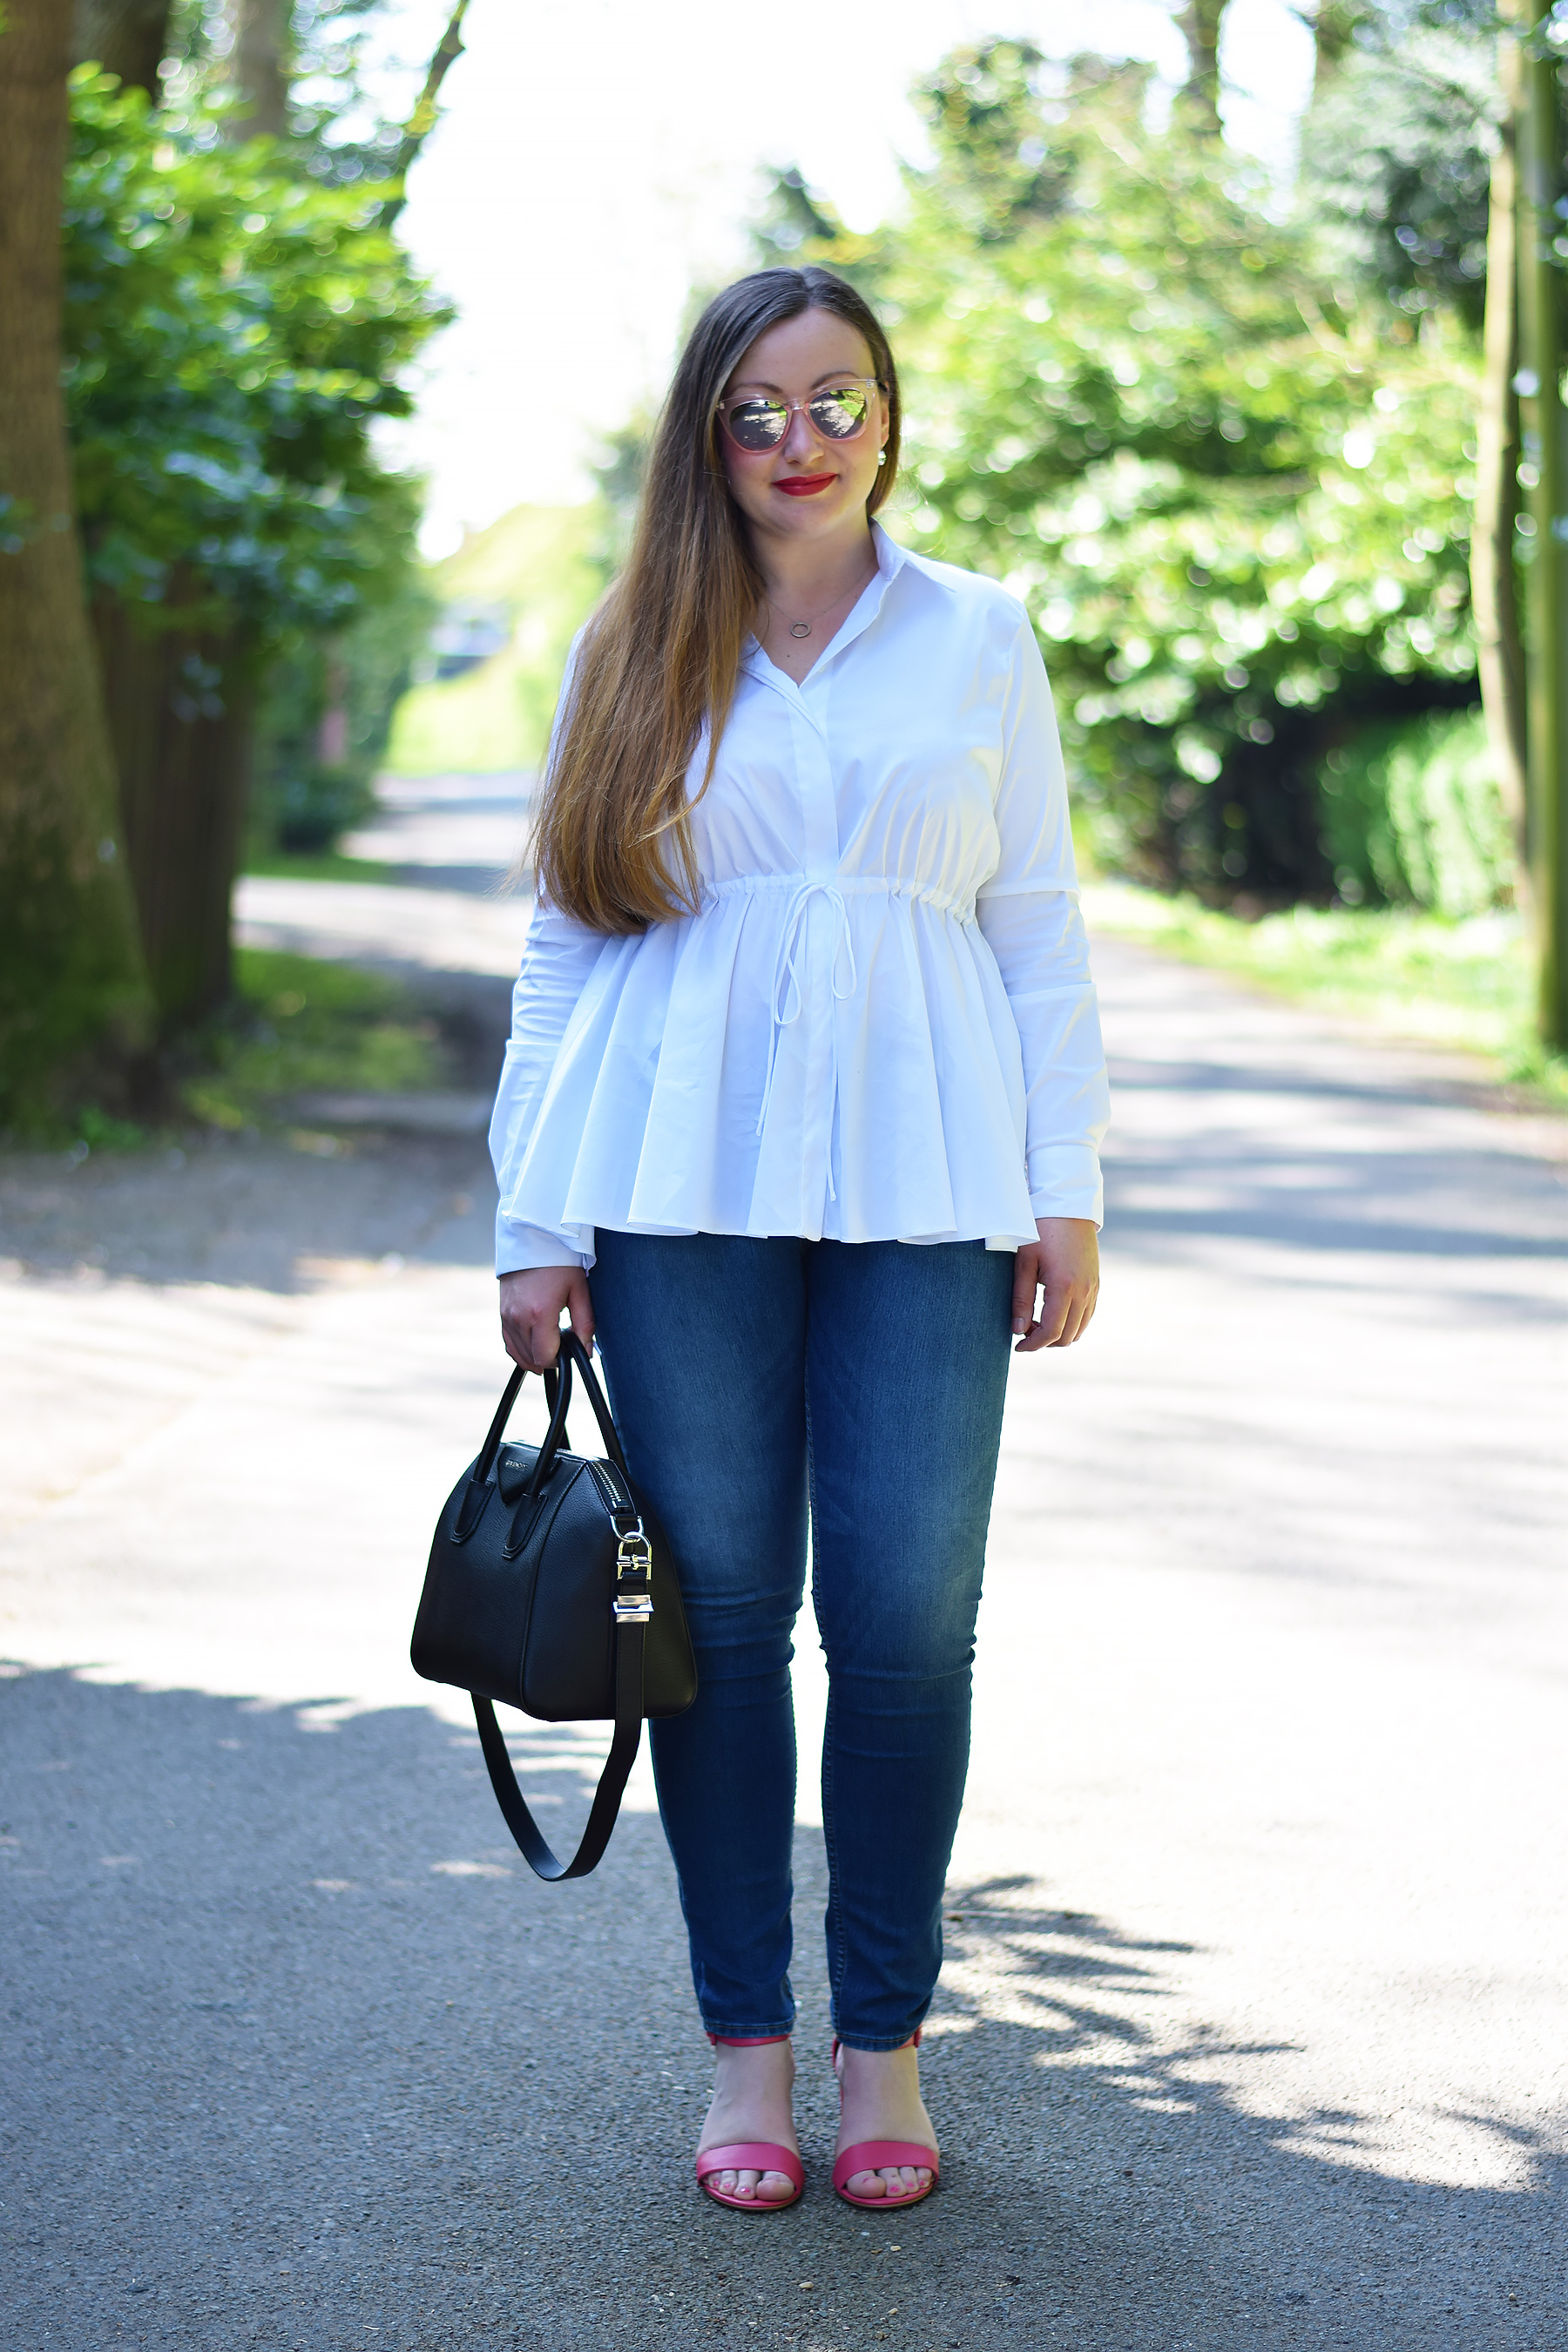 White shirt outfit with pink sandals